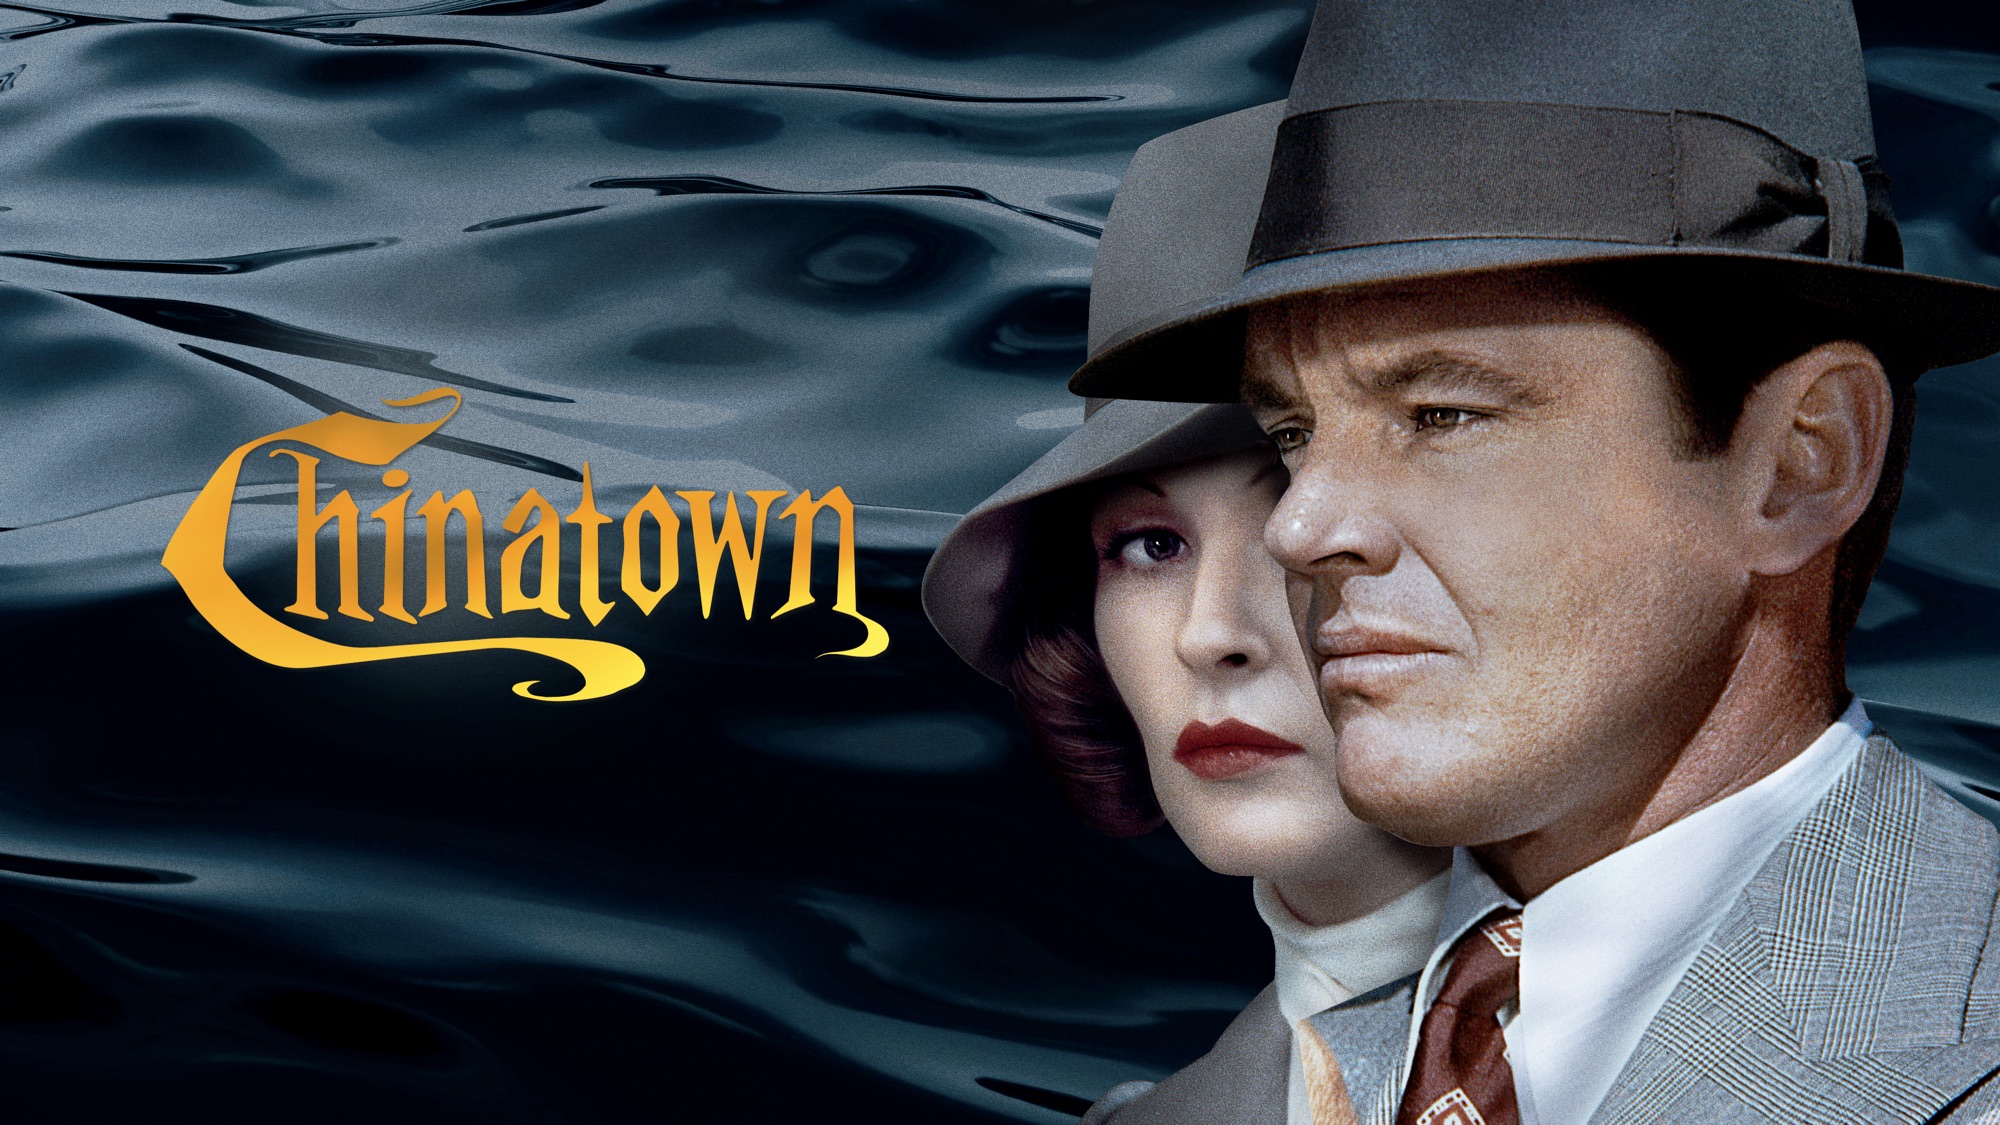 movie, chinatown lock screen backgrounds